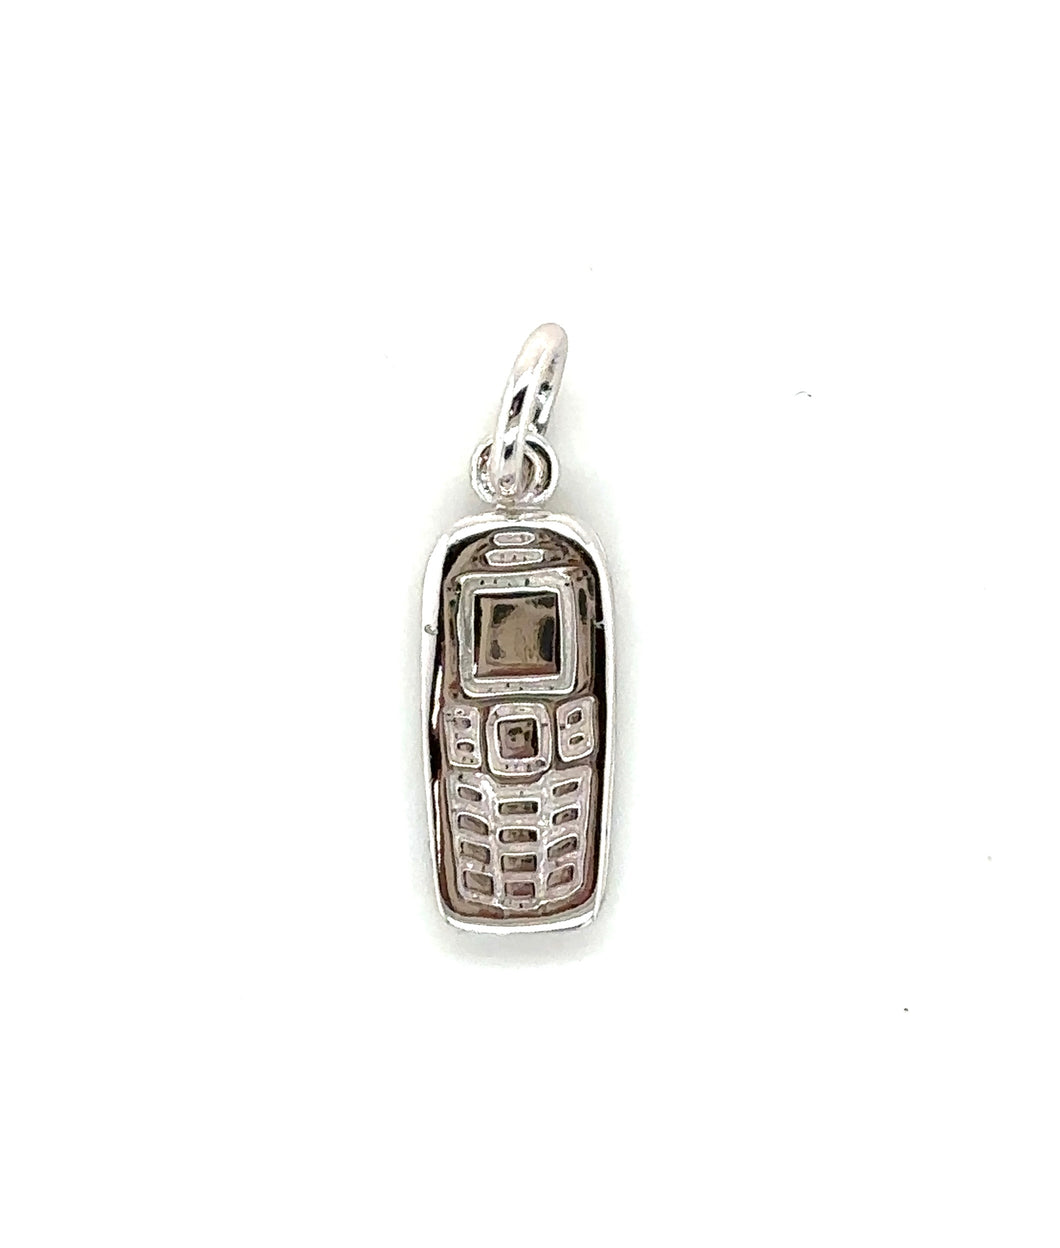 Silver Mobile Phone Charm